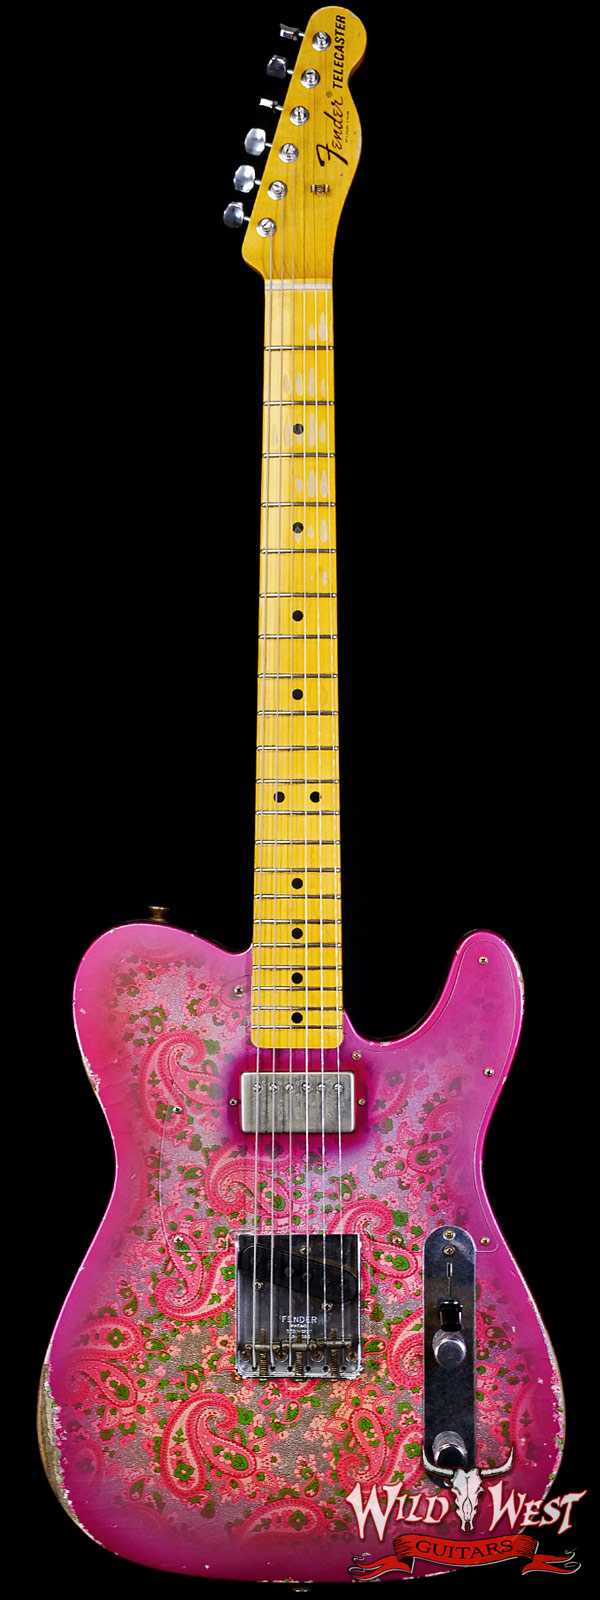 Fender Custom Shop Ron Thorn Masterbuilt 1968 Telecaster HS Hand-Wound Pickup Relic Pink Paisley